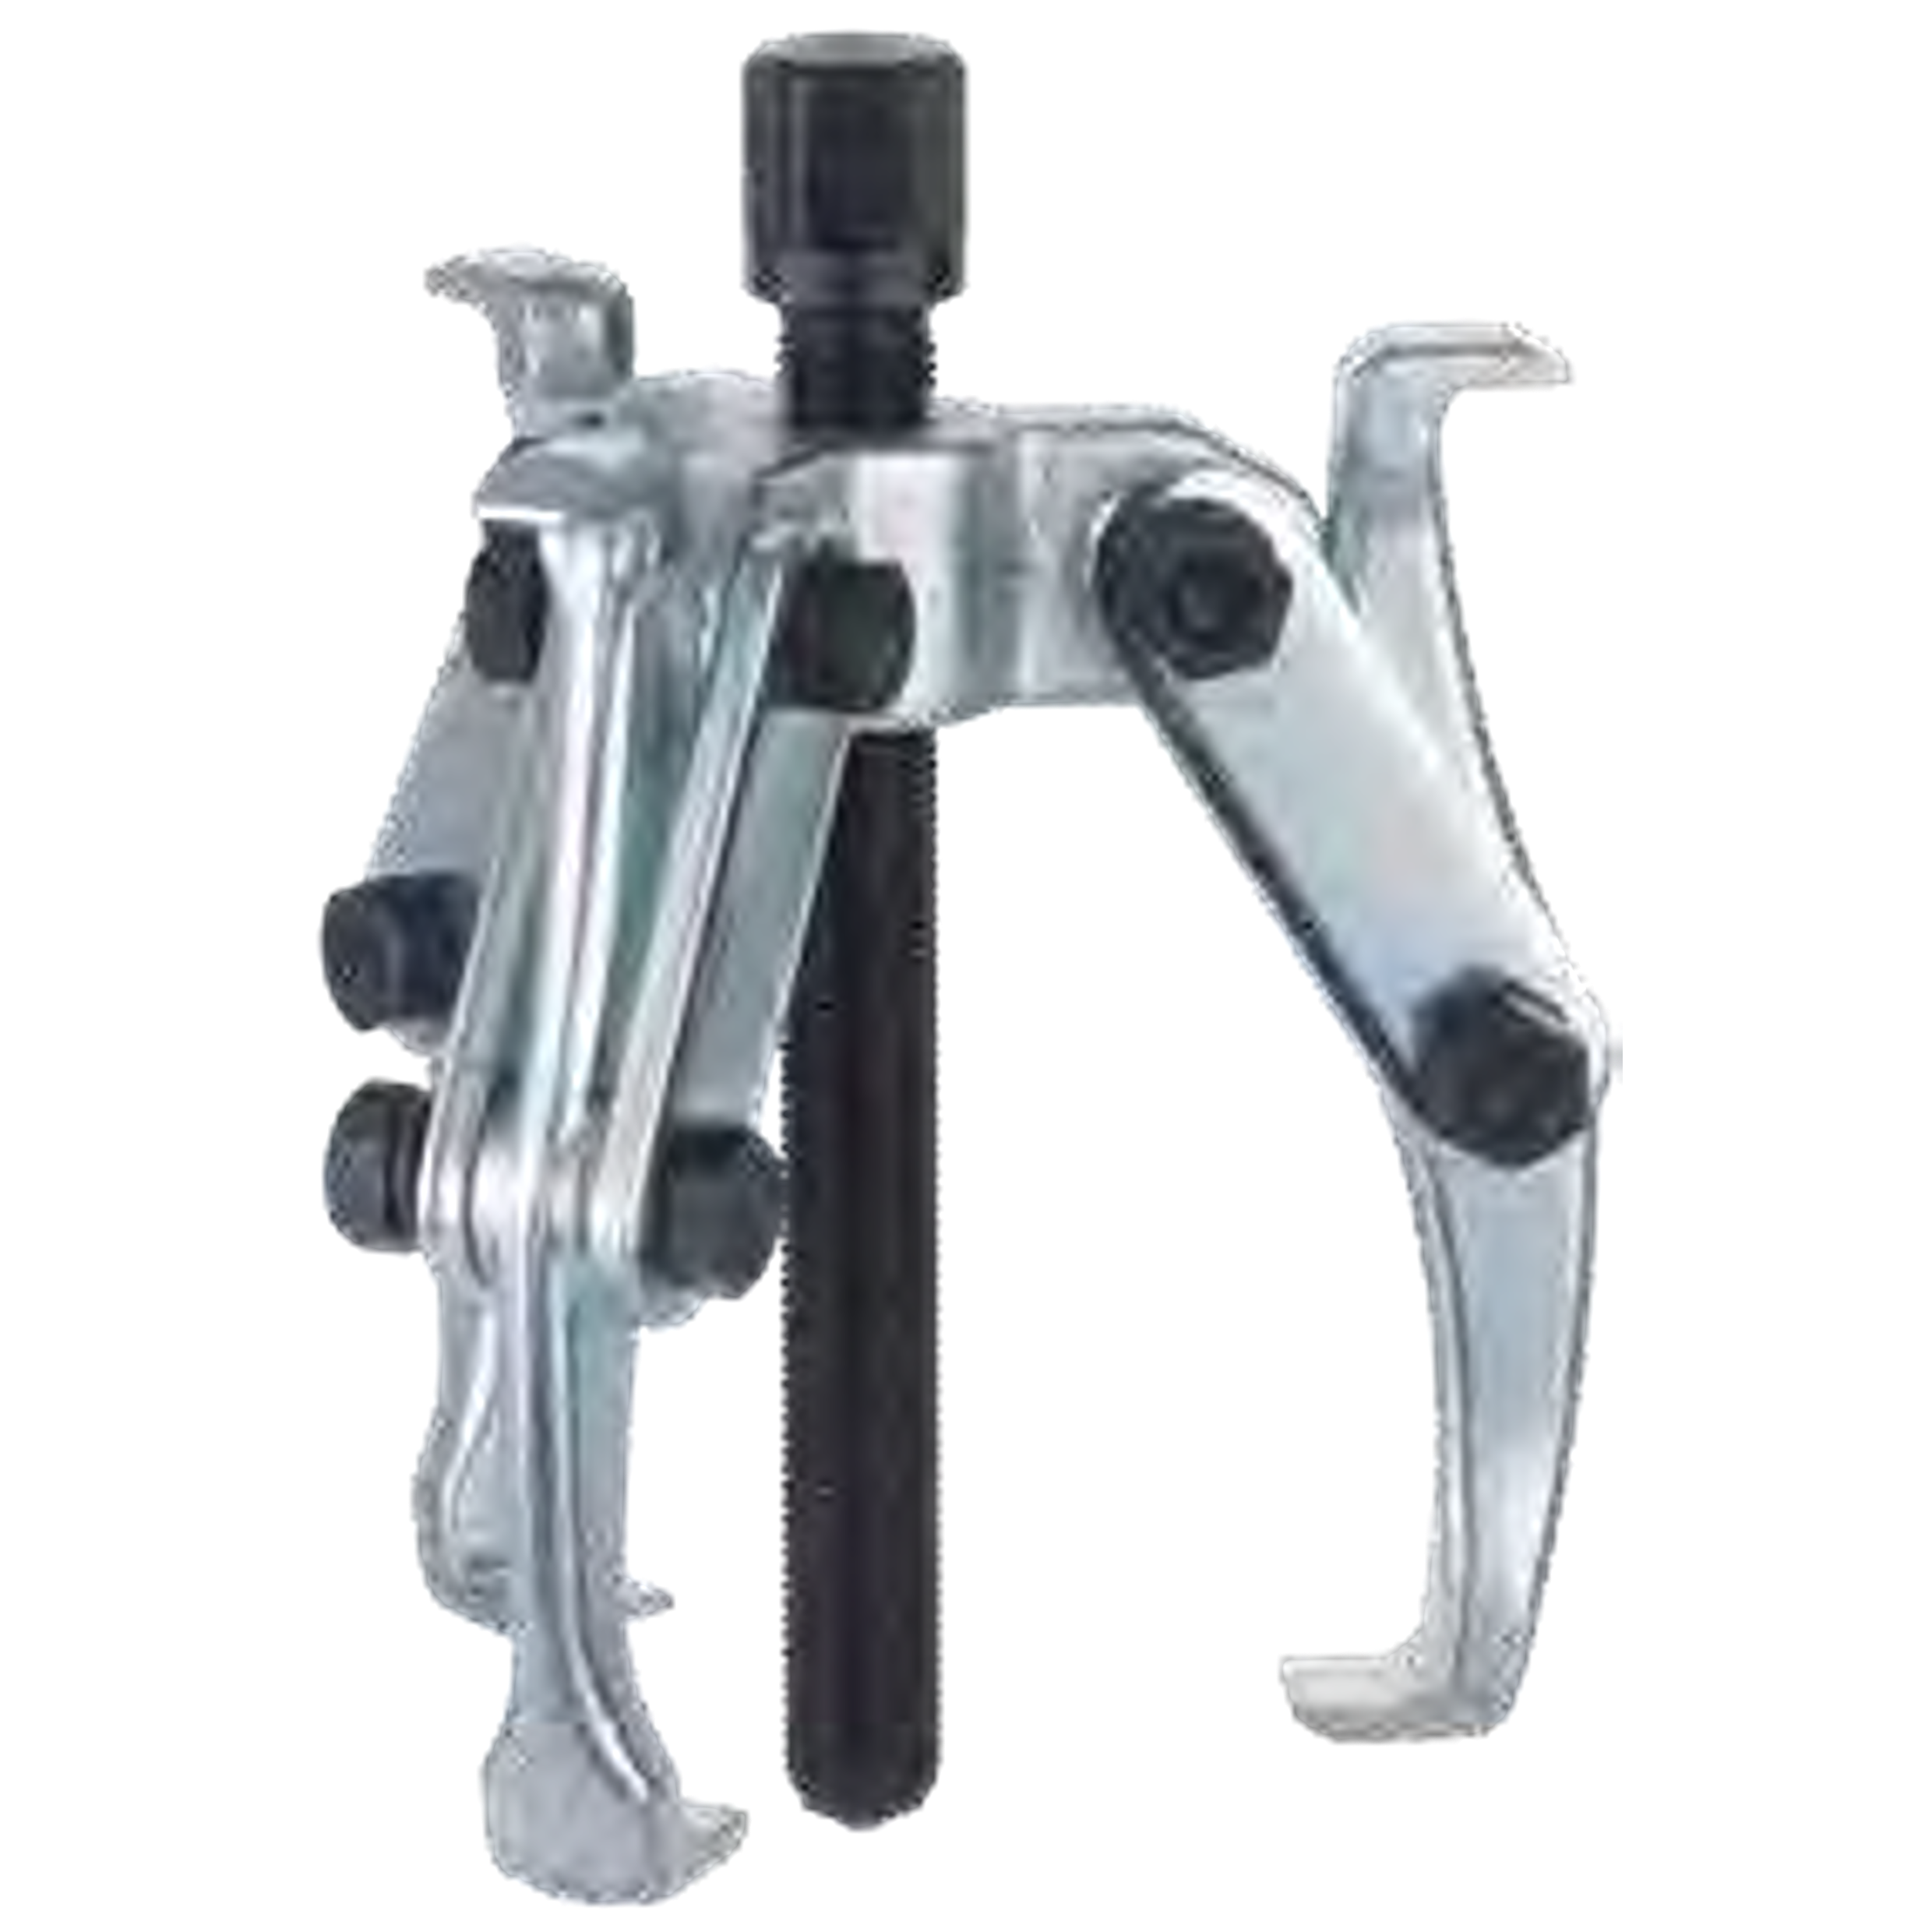 NEXUS 134 Strap-Puller, 3-Arms - Premium Mechanical Pullers from NEXUS - Shop now at Yew Aik.